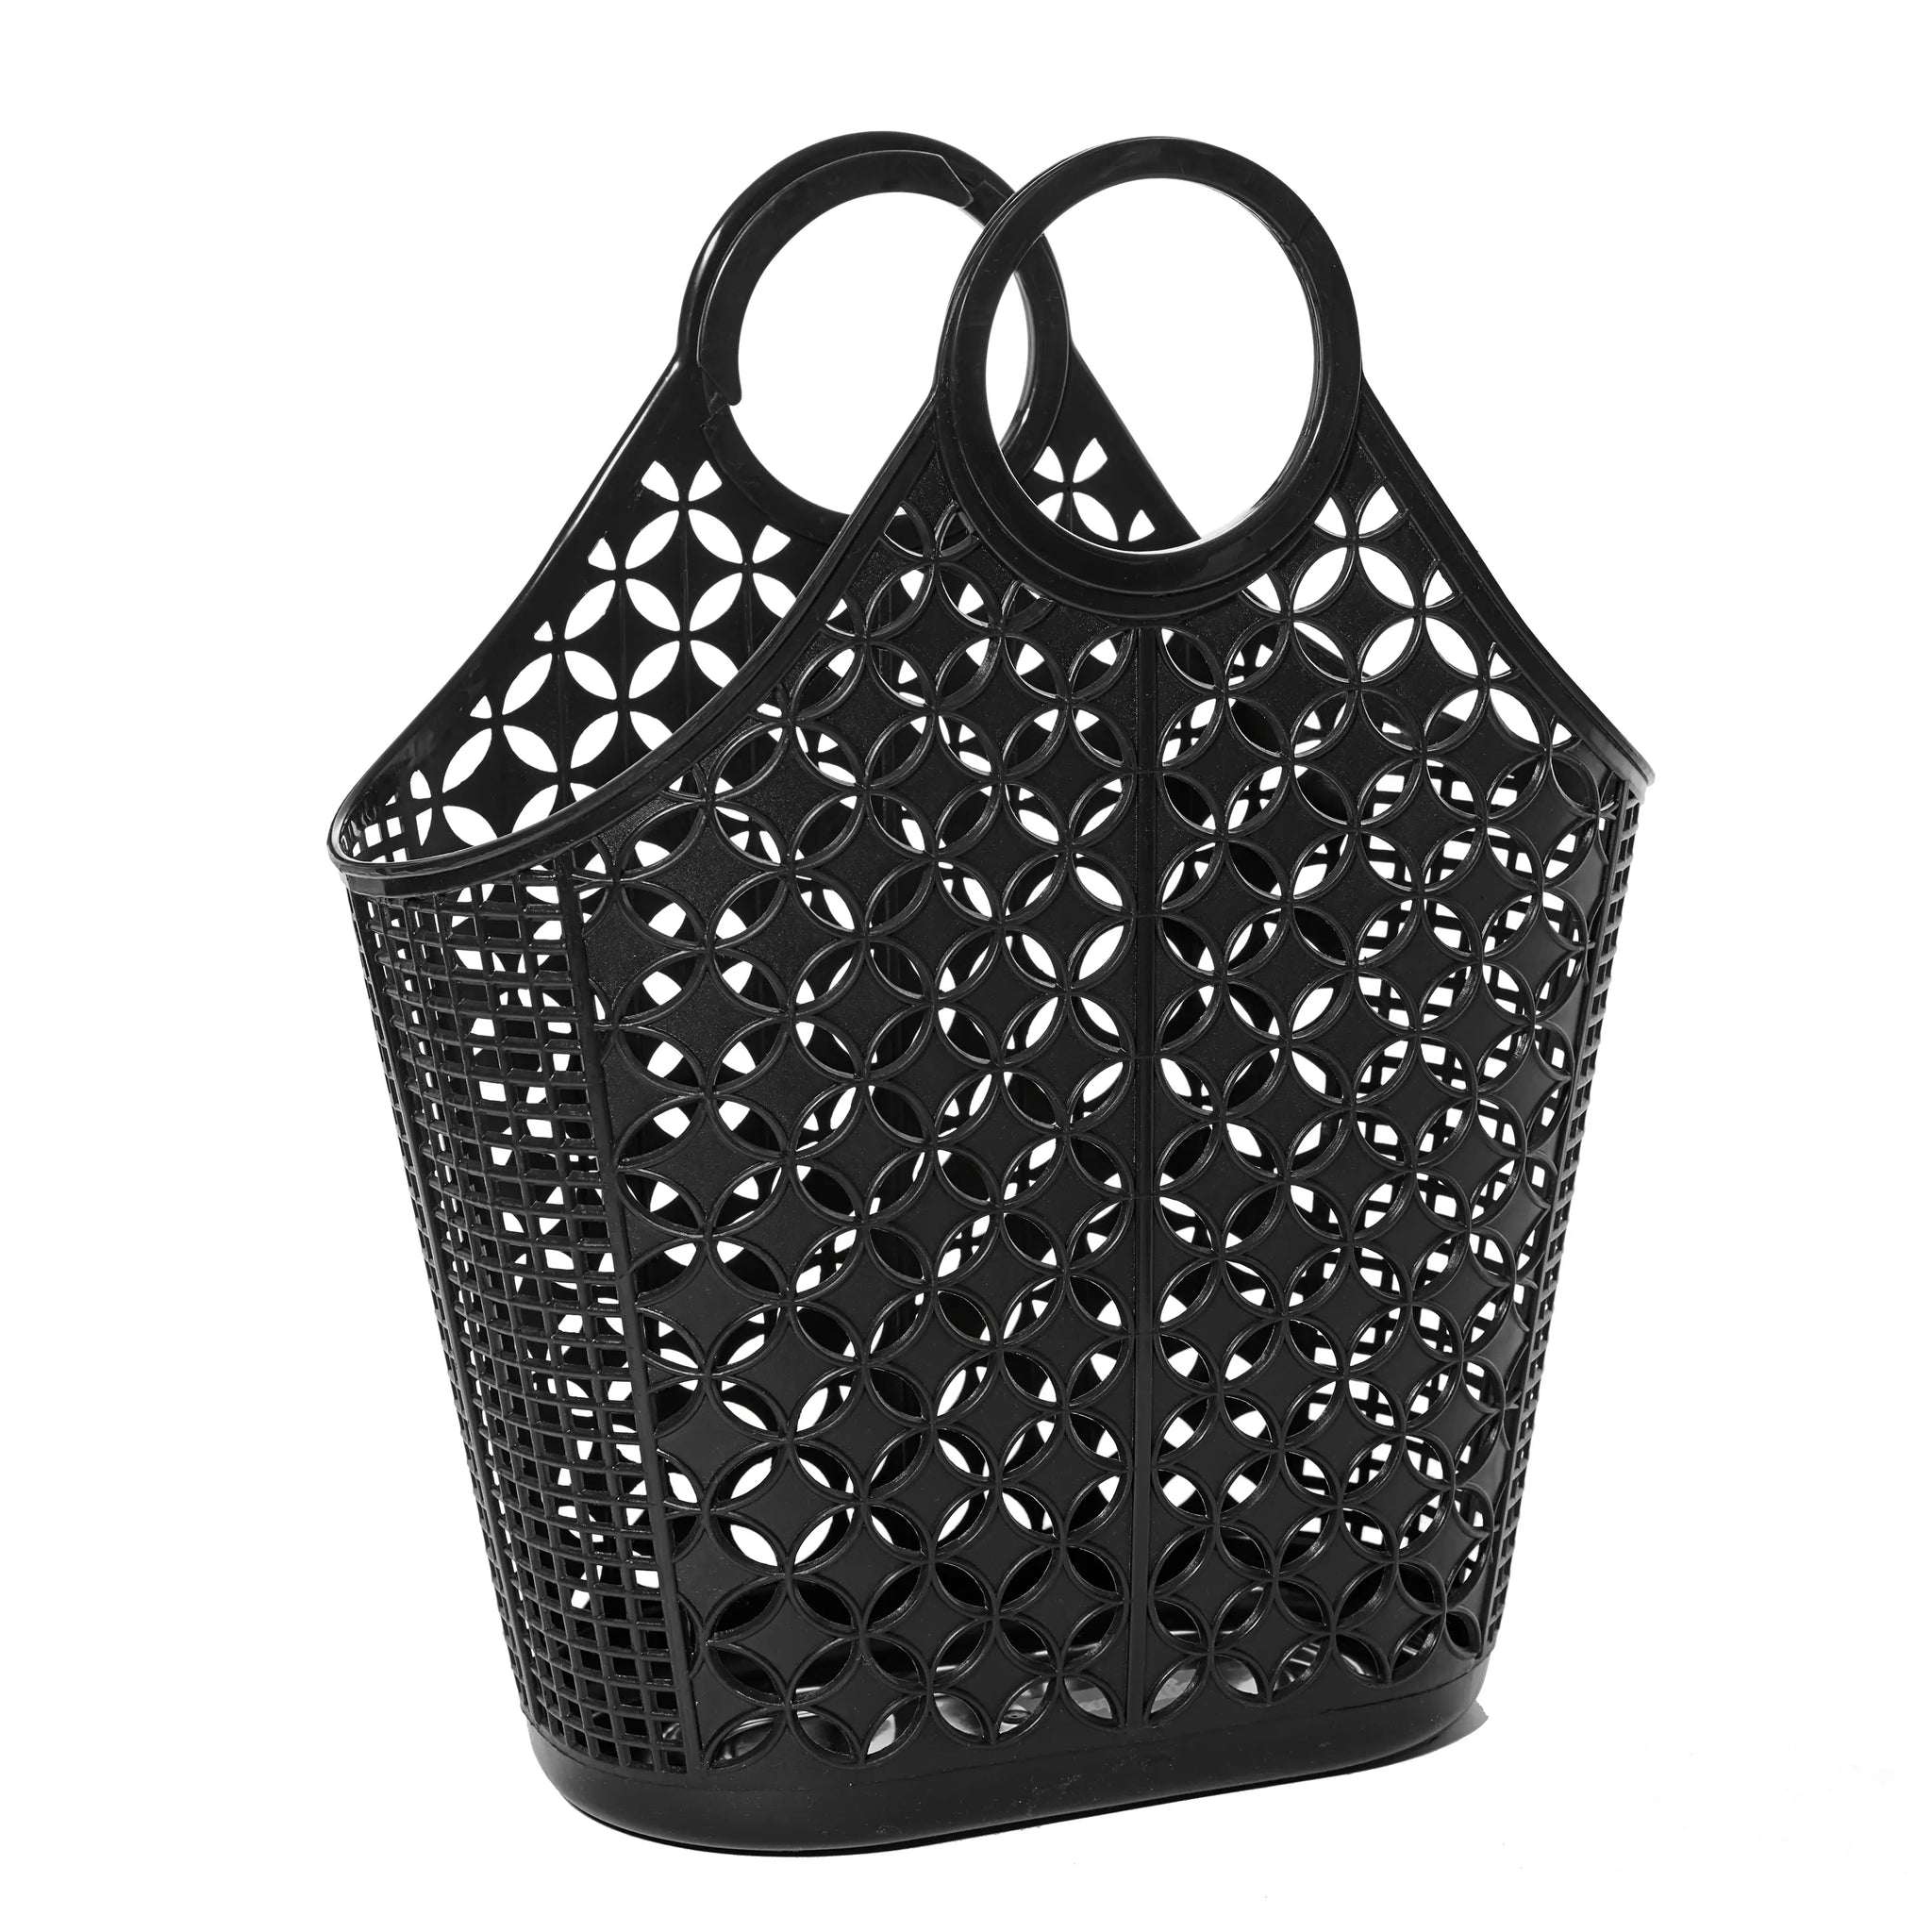 A large black plastic purse with two round interlocking handles, a flat base, and a diamond and grid pattern 